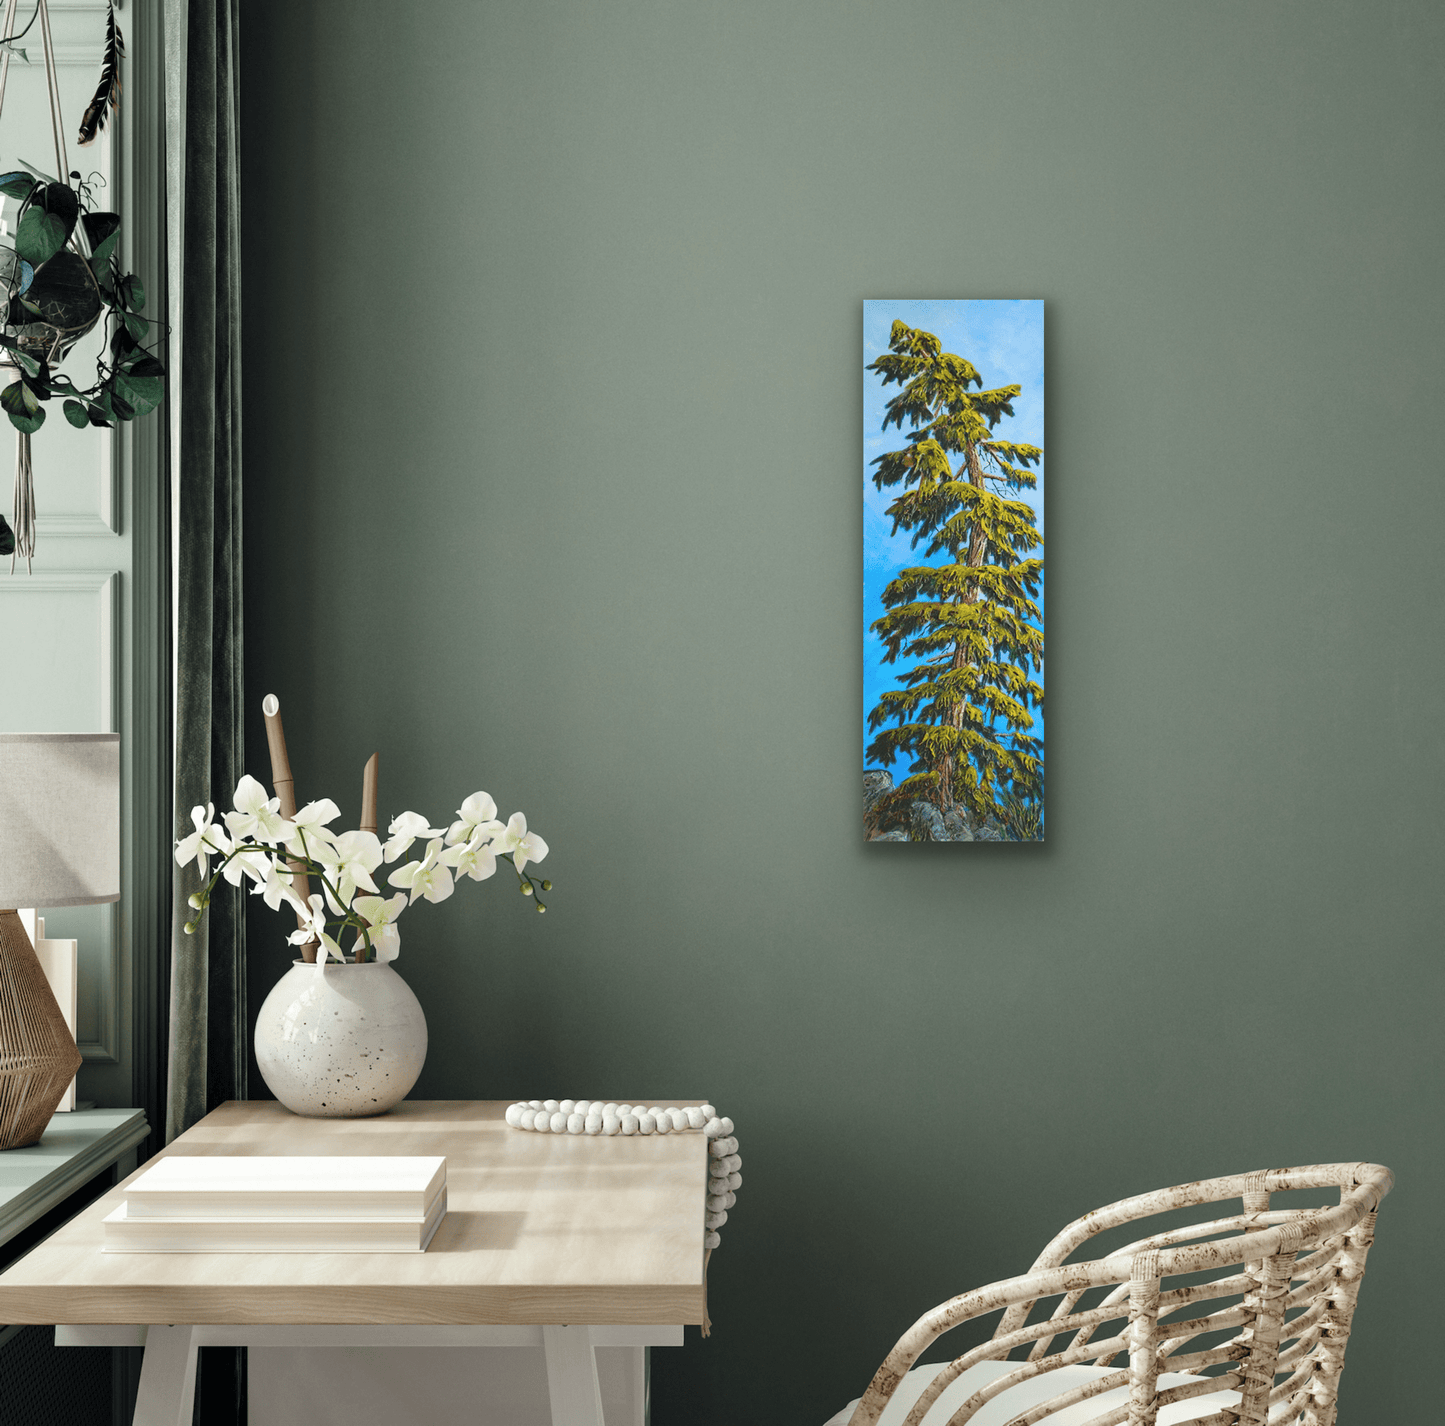 This original painting of a green mature tree with a light blue background would look great in an office or bedroom.